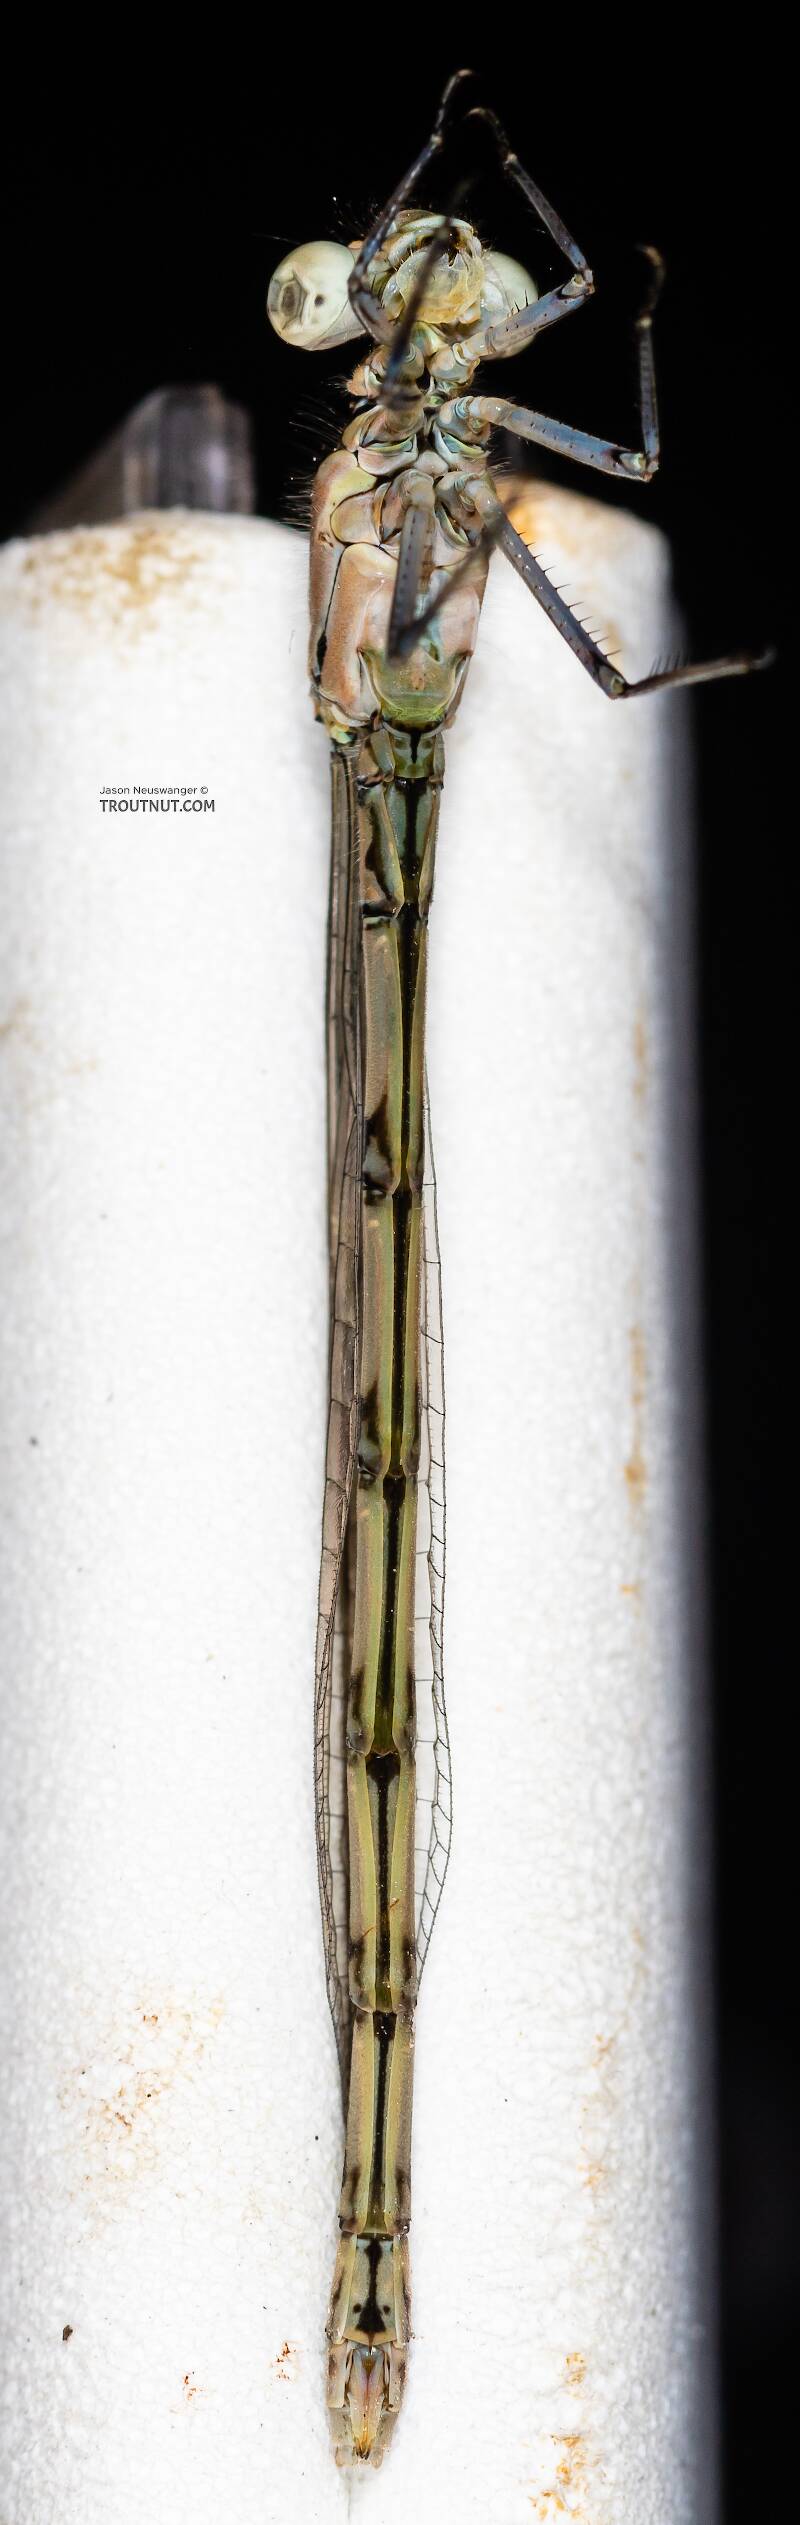 Ventral view of a Odonata-Zygoptera (Damselfly) Insect Adult from the Madison River in Montana